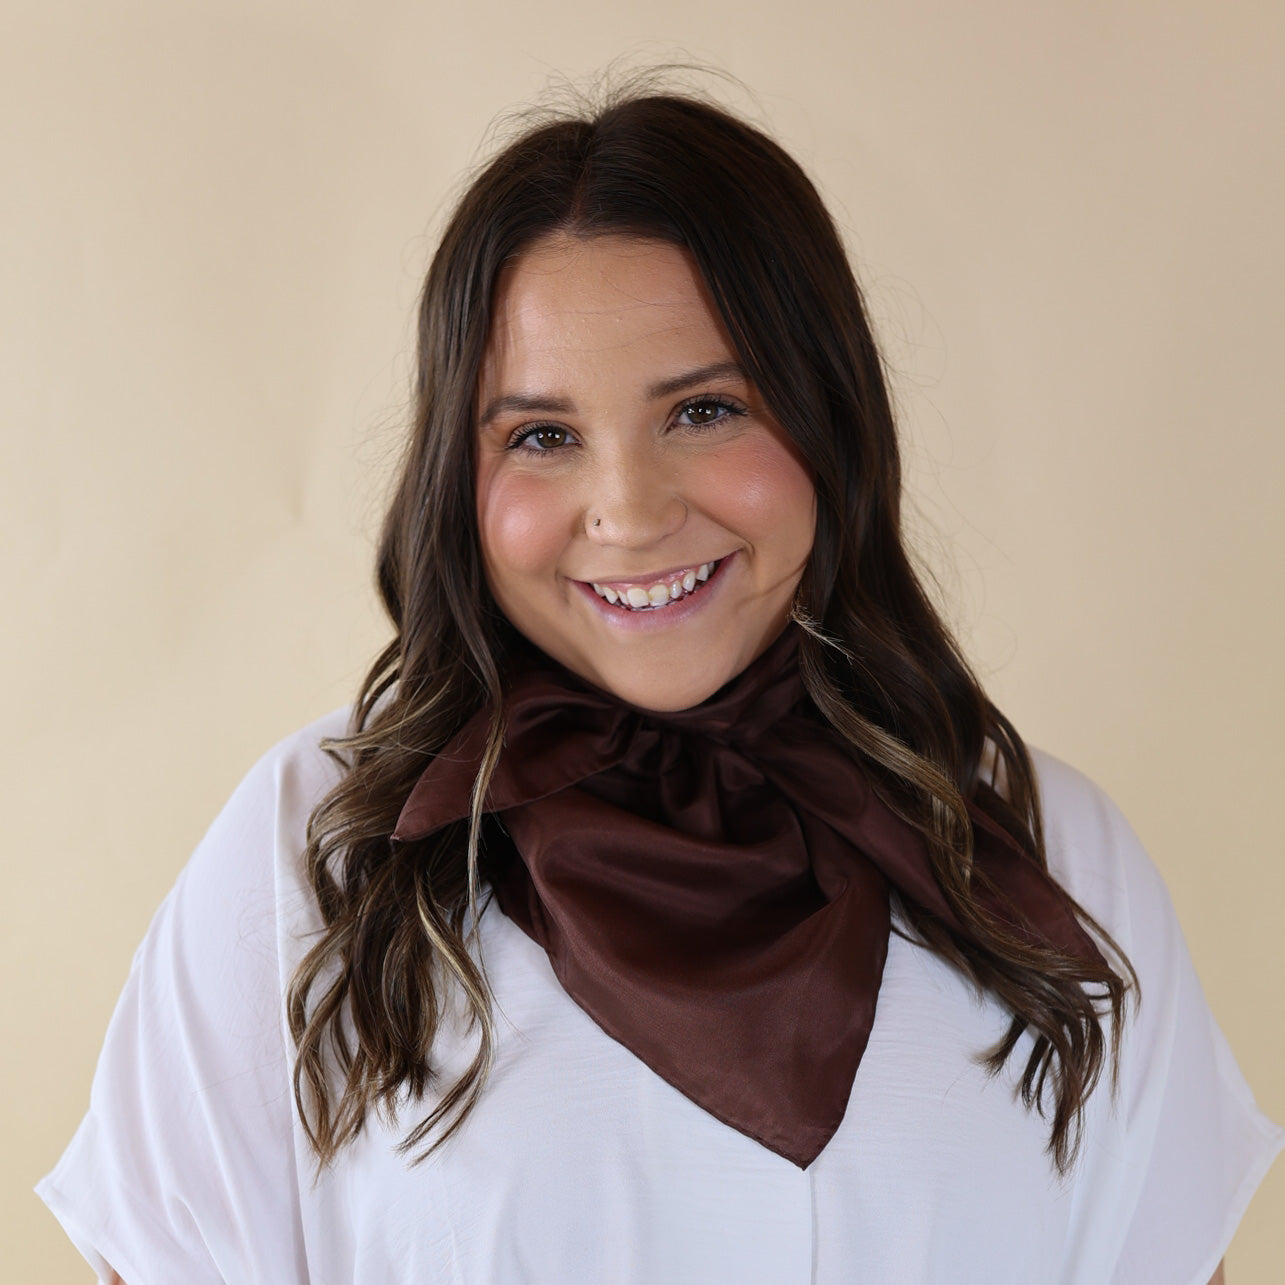 Brunette model is pictured wearing a white, Drop shoulder top with a solid brown scarf tied around her neck. Model is pictured in front of a beige background.